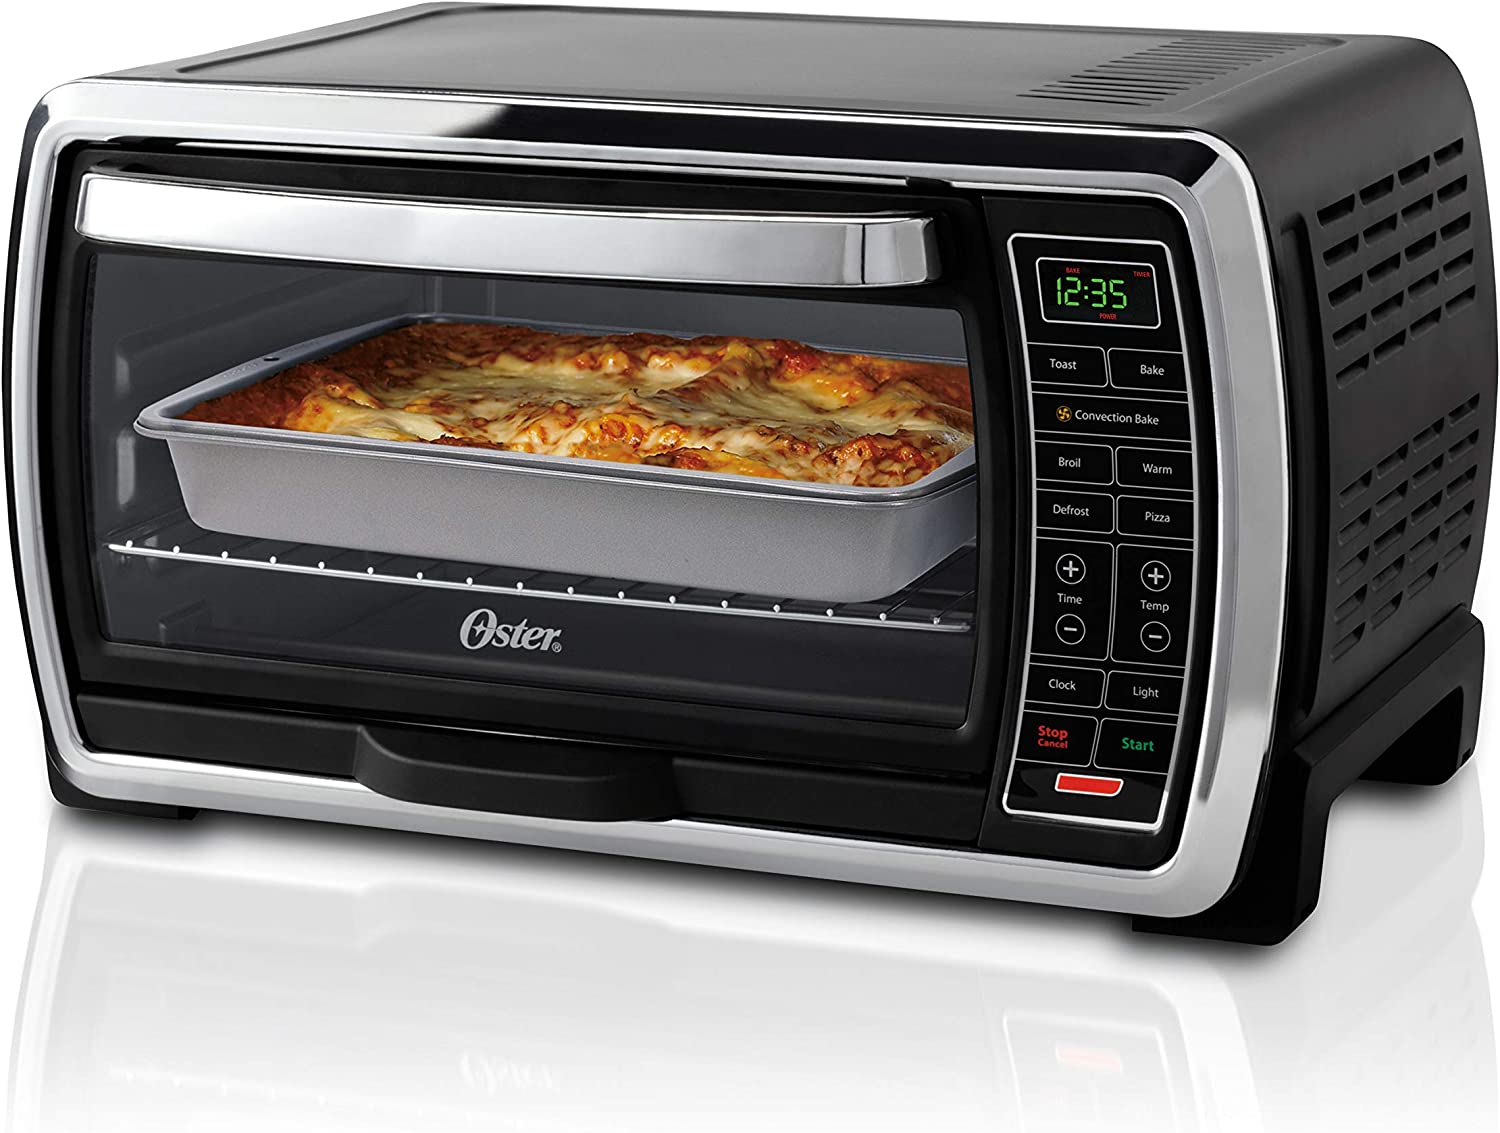 Oster Toaster Oven Digital Convection Oven, Large 6-Slice Capacity, Black Polished Stainless